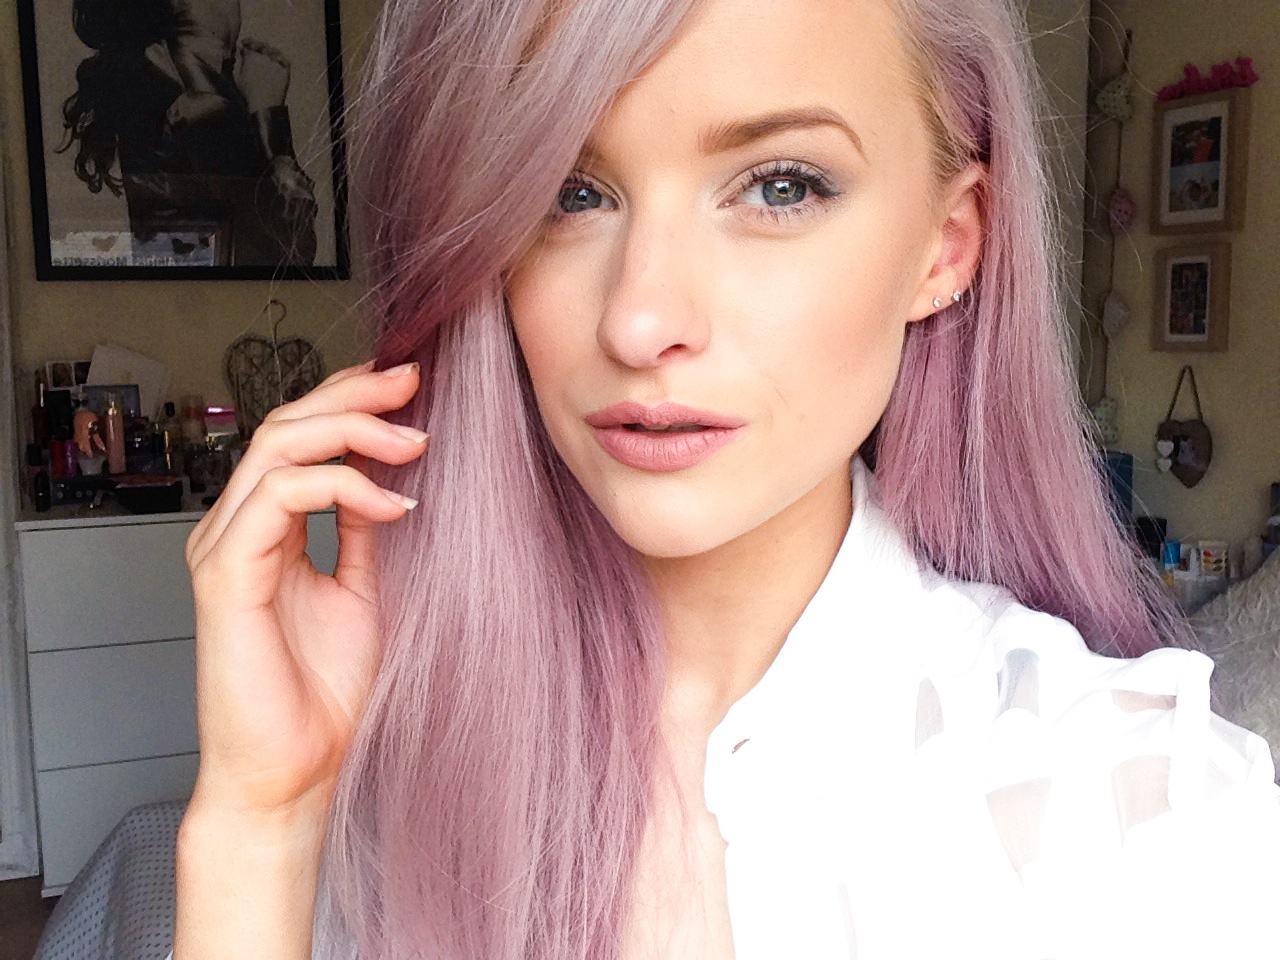 The Filmstar Makeover with Charlotte Tilbury - Inthefrow